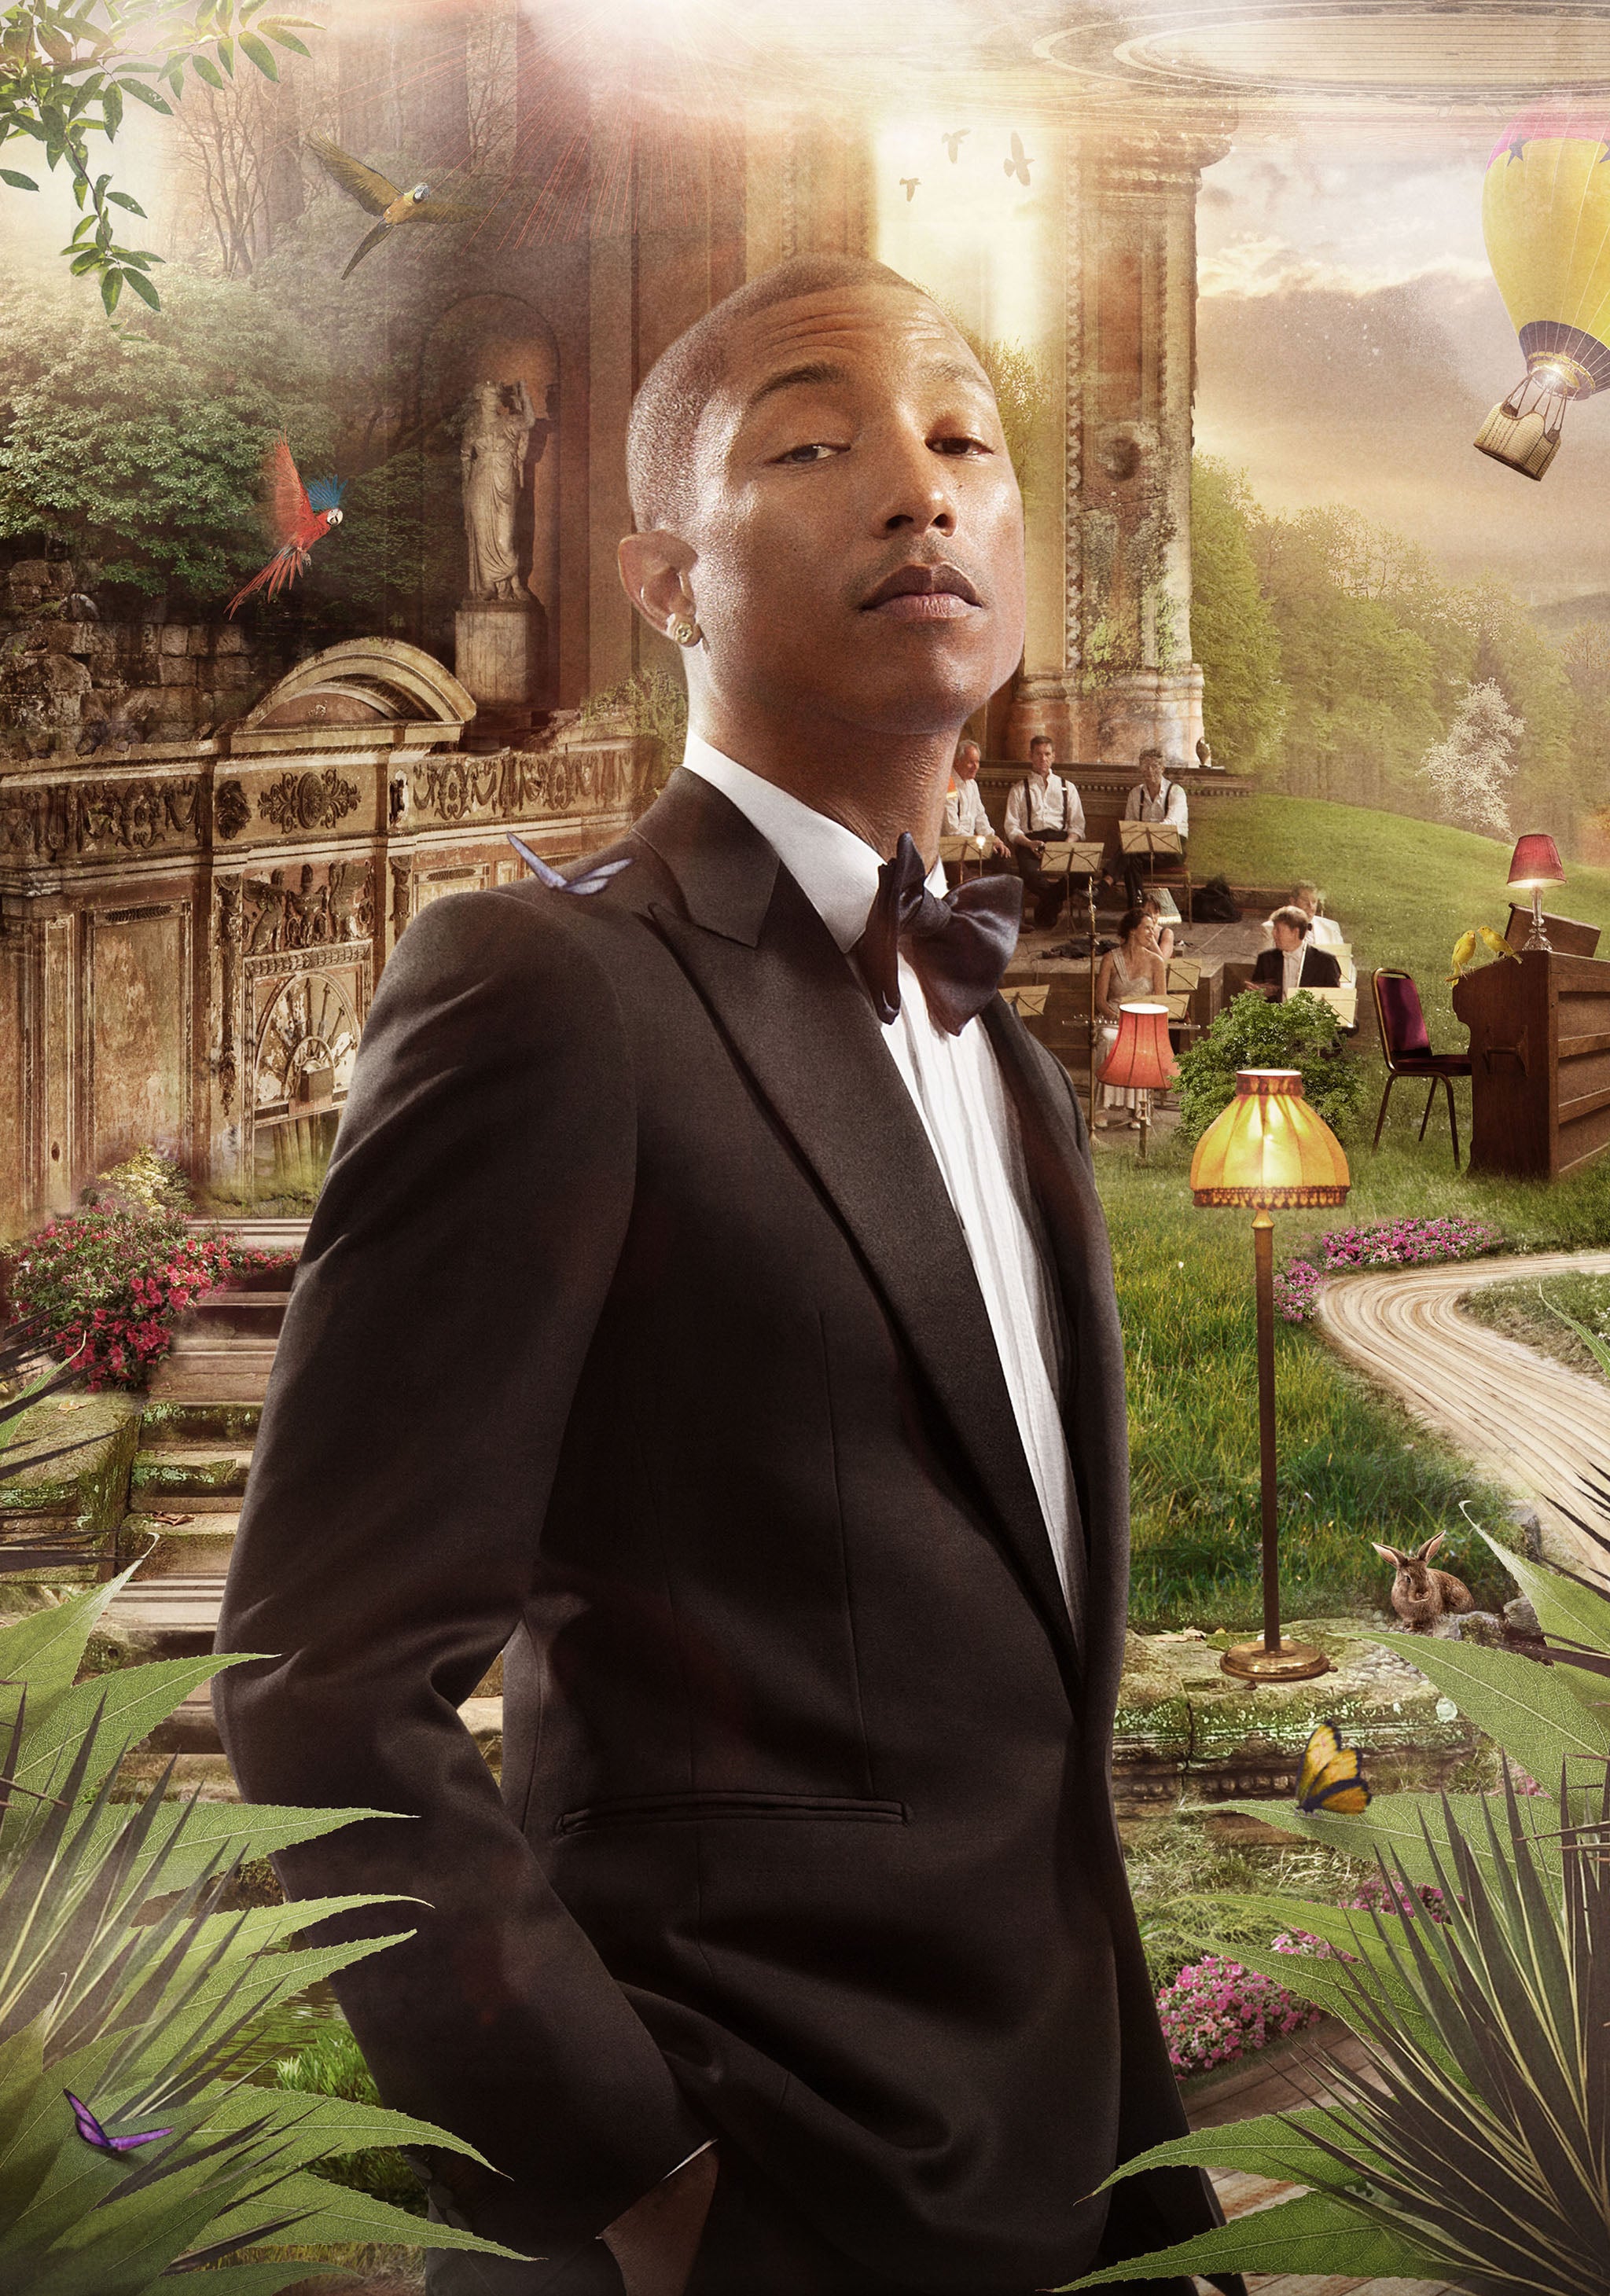 Pharrell Williams has a prominent role in the star-studded cover of 'God Only Knows' released by the BBC